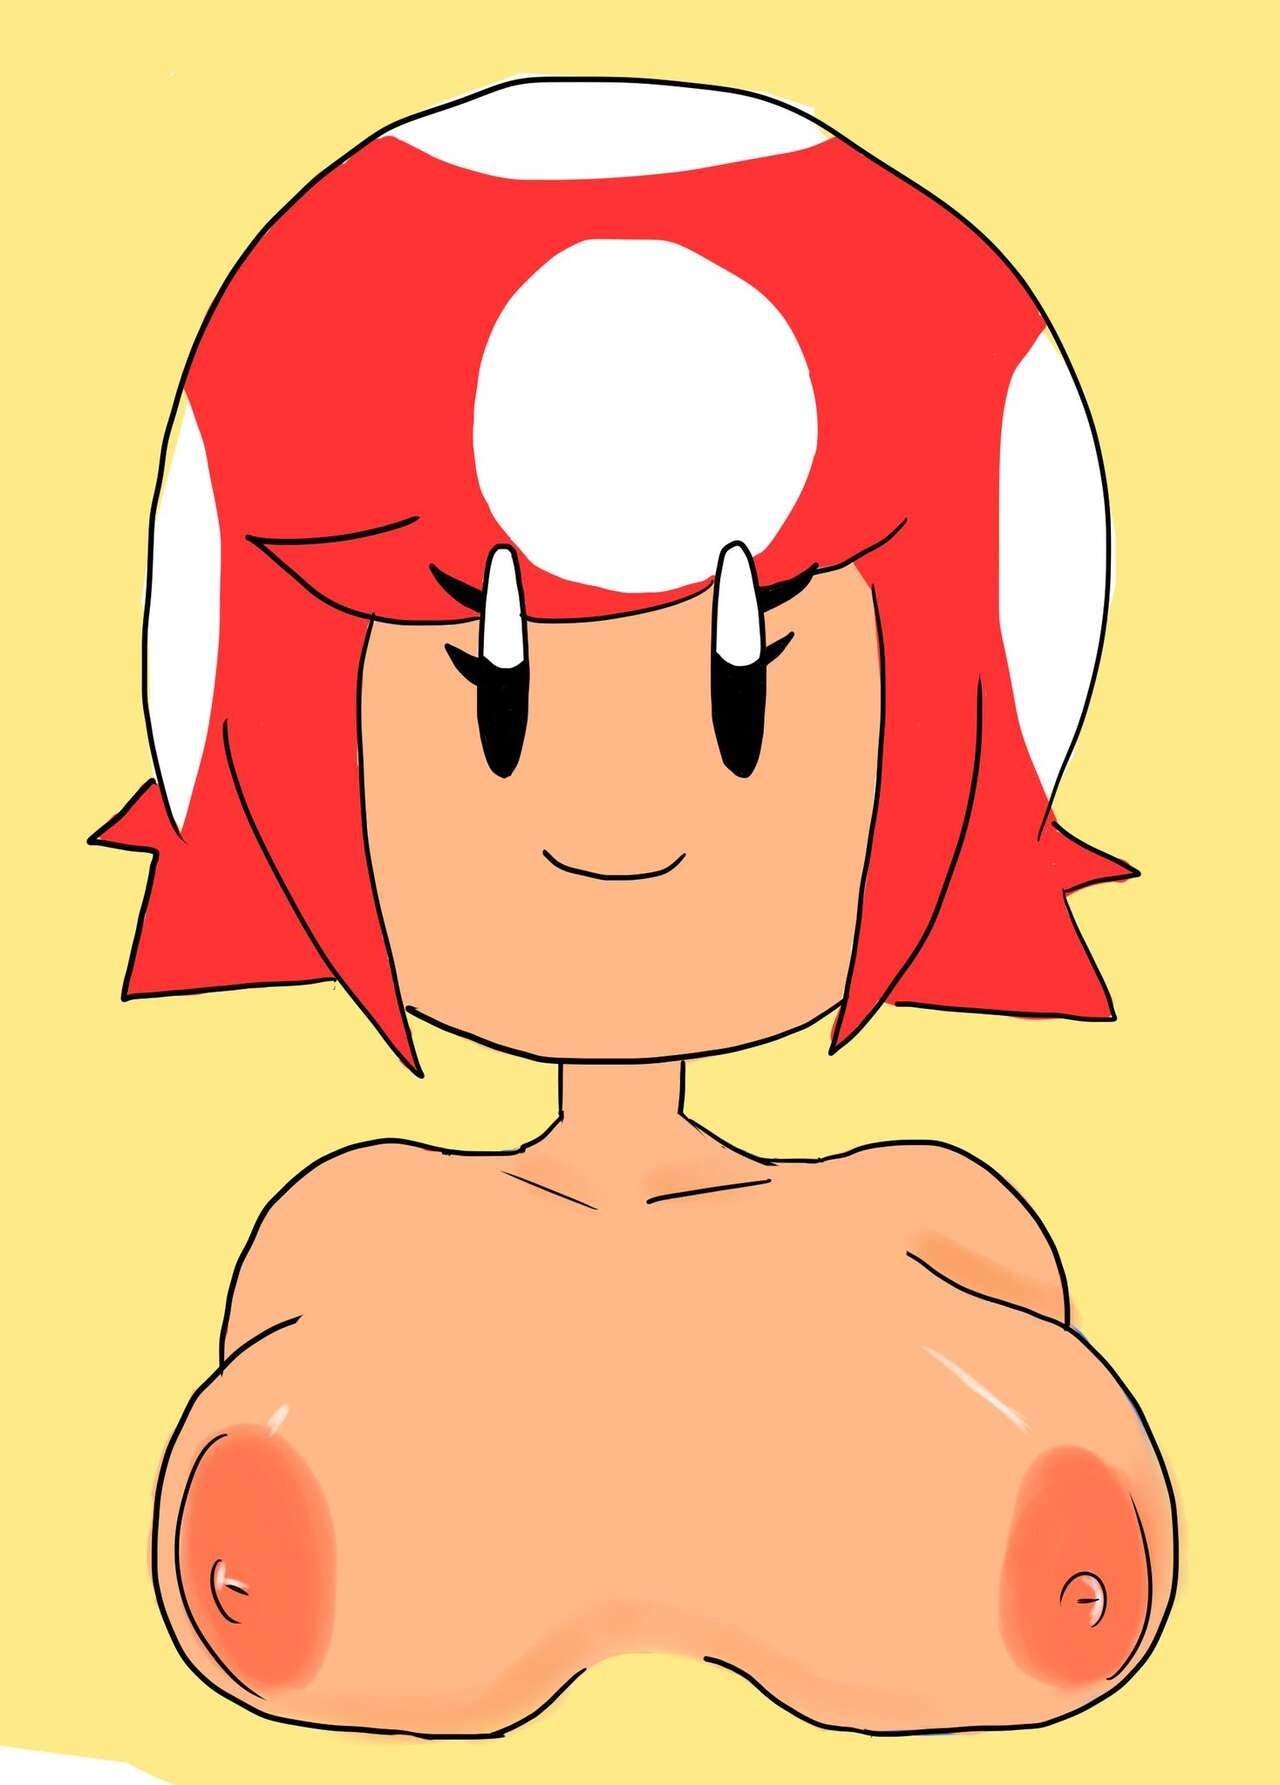 Do You Think Nintendo Purposely Makes Mario Items And Powerups Naked In Order To Awaken Little Boys' Sexuality? 13